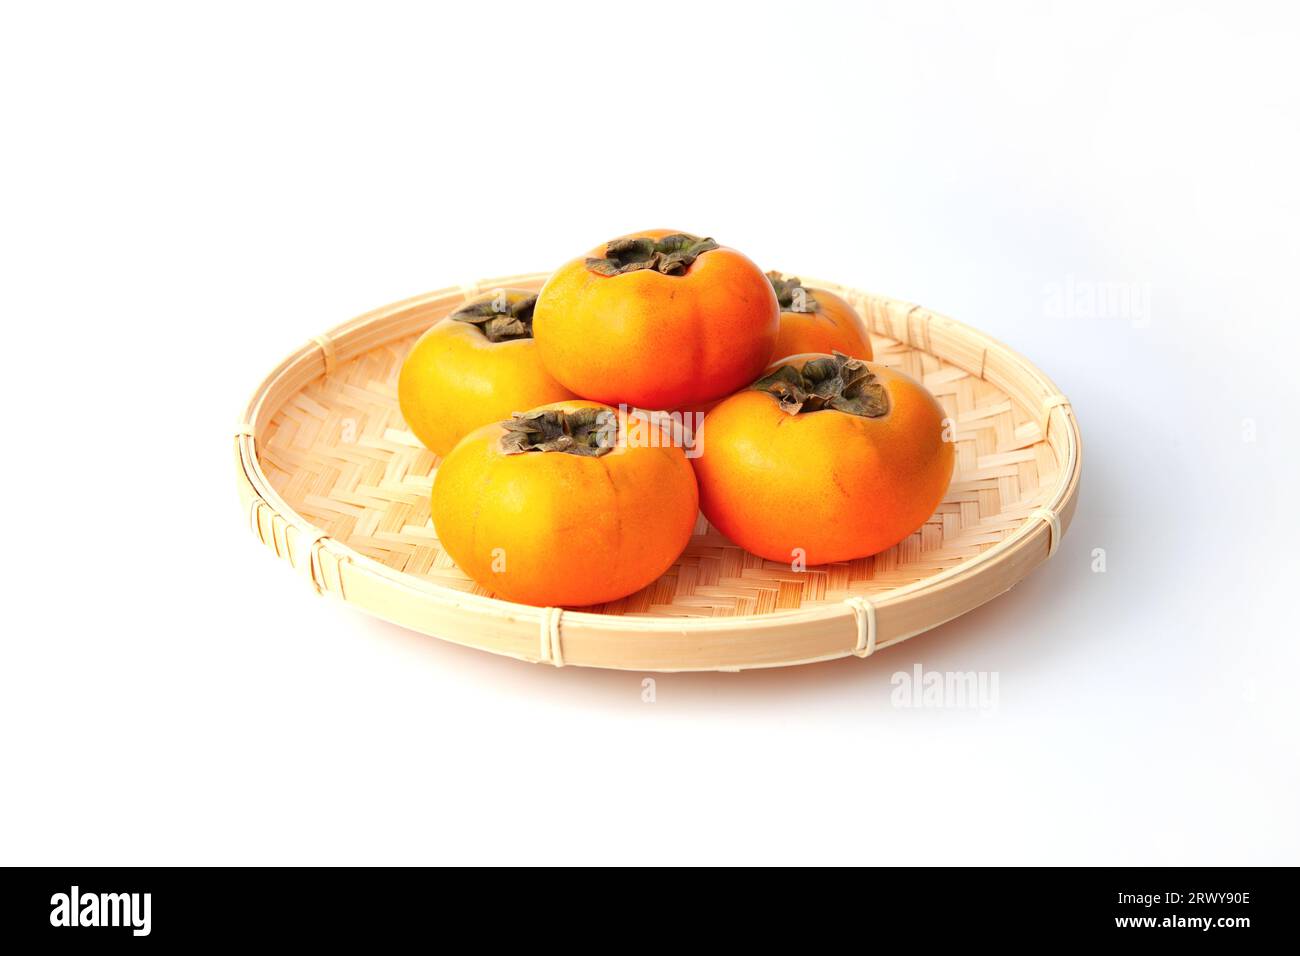 ripe persimmon isolated on white background Stock Photo